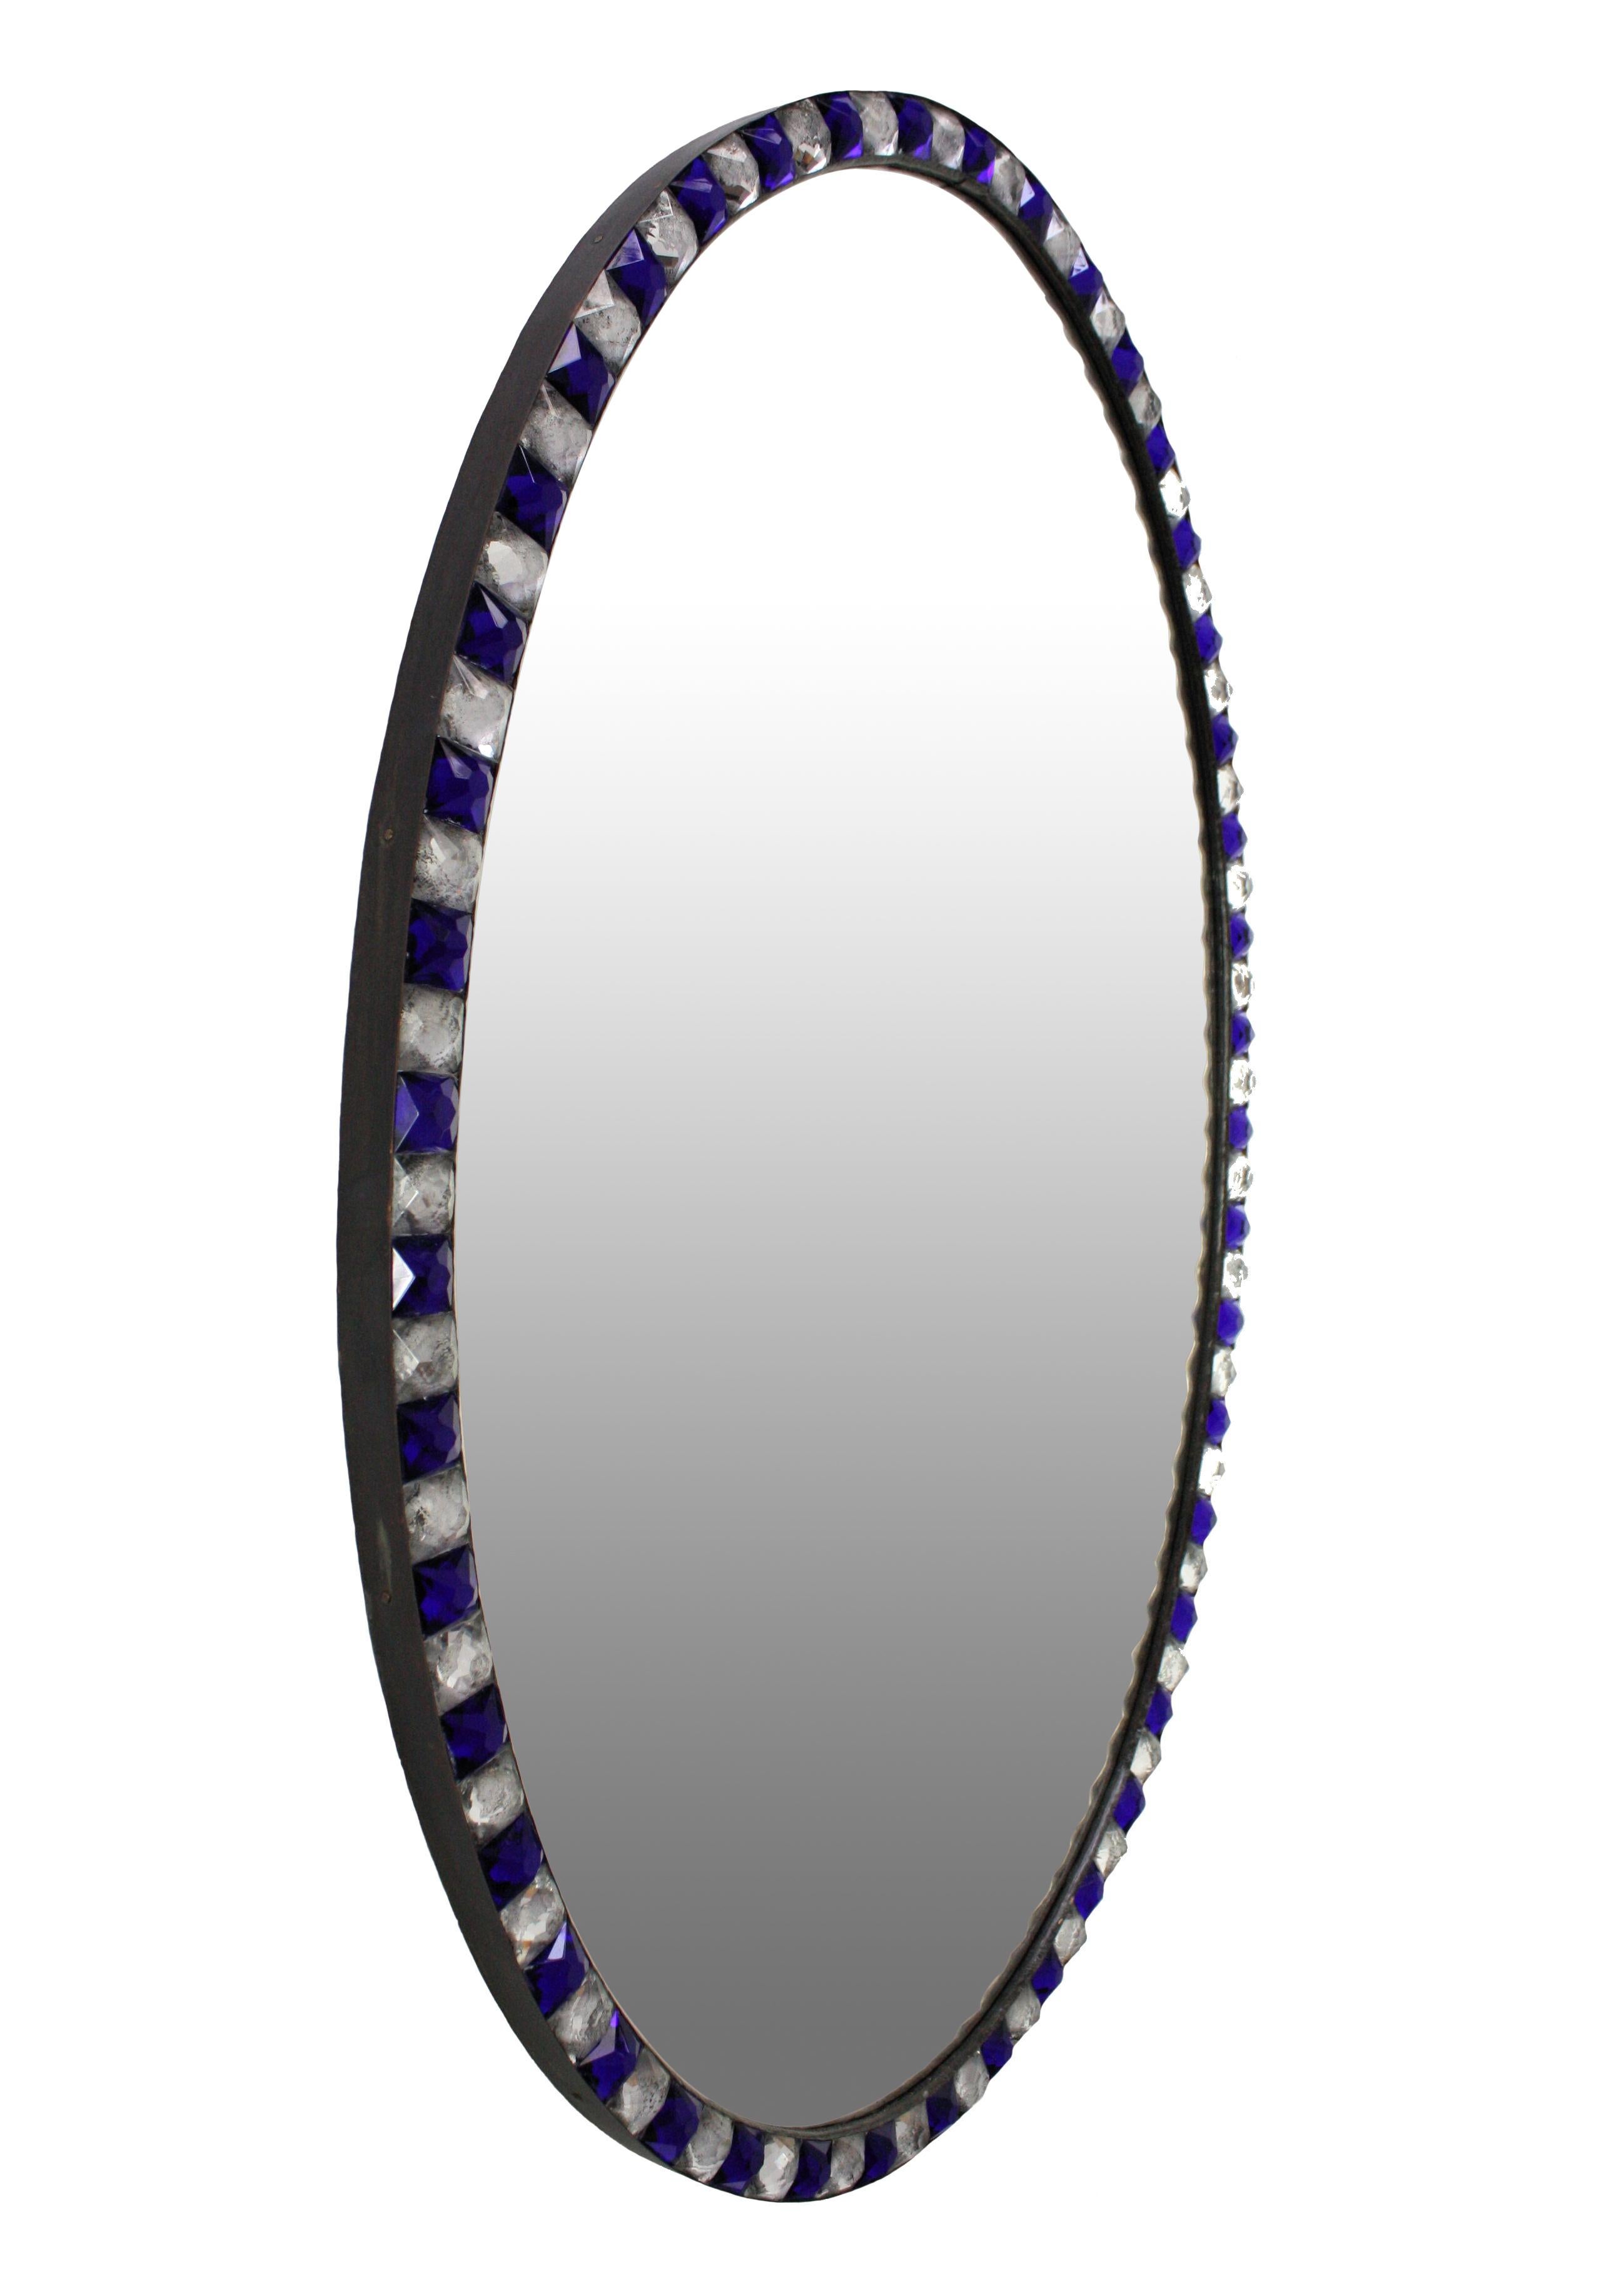 Pair of Stunning Irish Mirrors with Faceted Rock Crystal and Blue Glass Borders 2